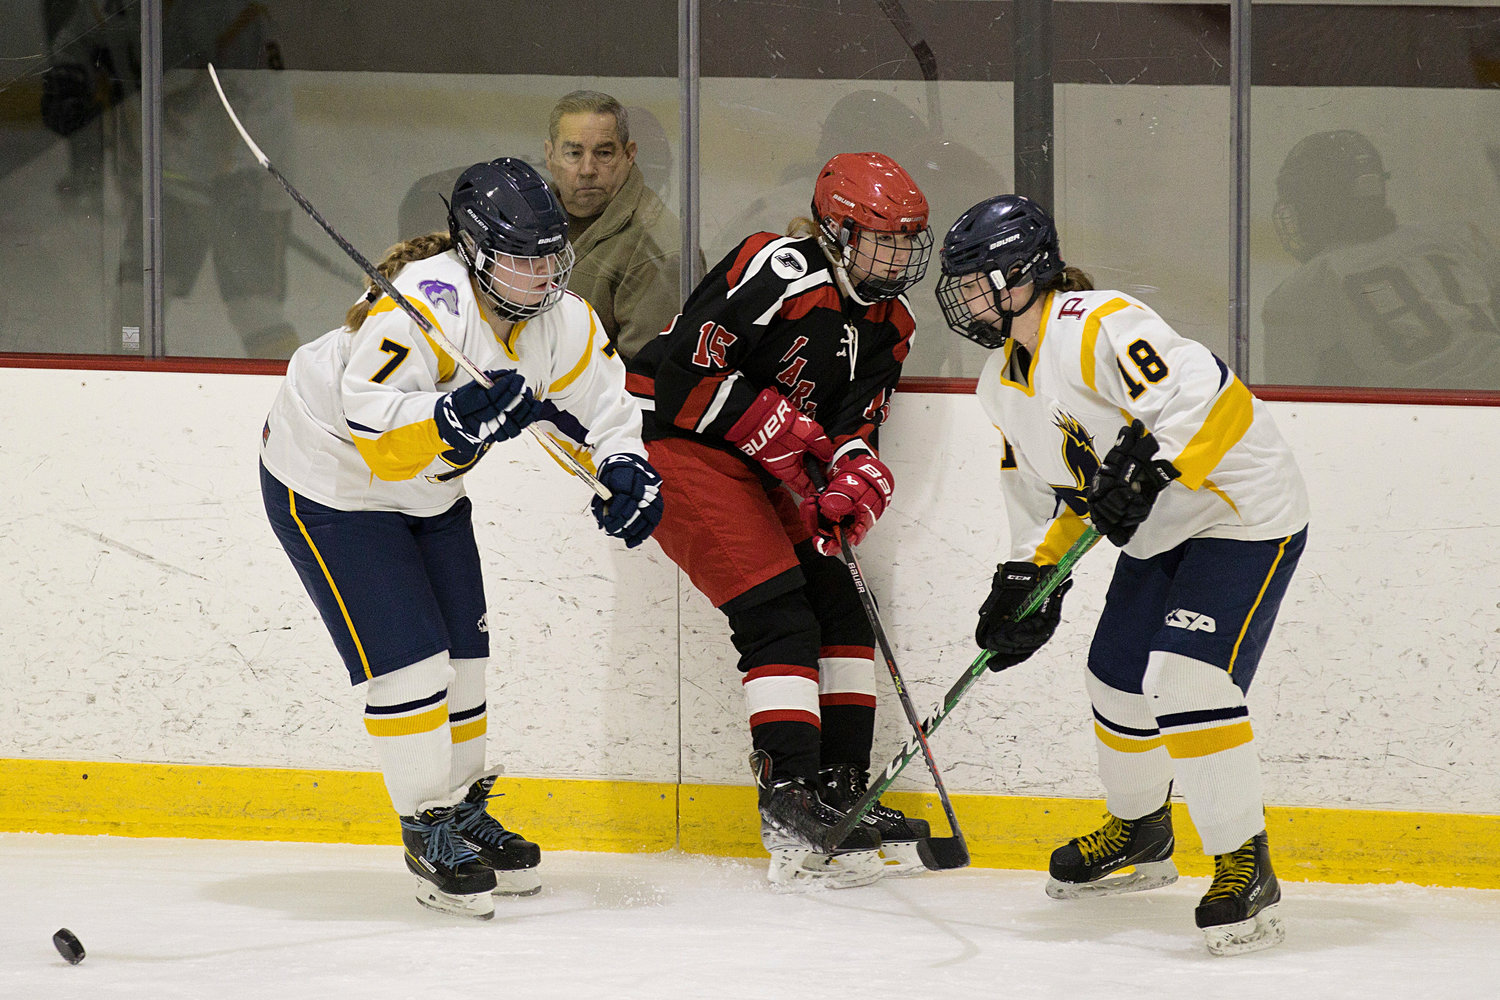 Emma Levine (left) and Hannah LeBlanc sandwich a Warwick opponent against the boards while battling for possession of the puck.